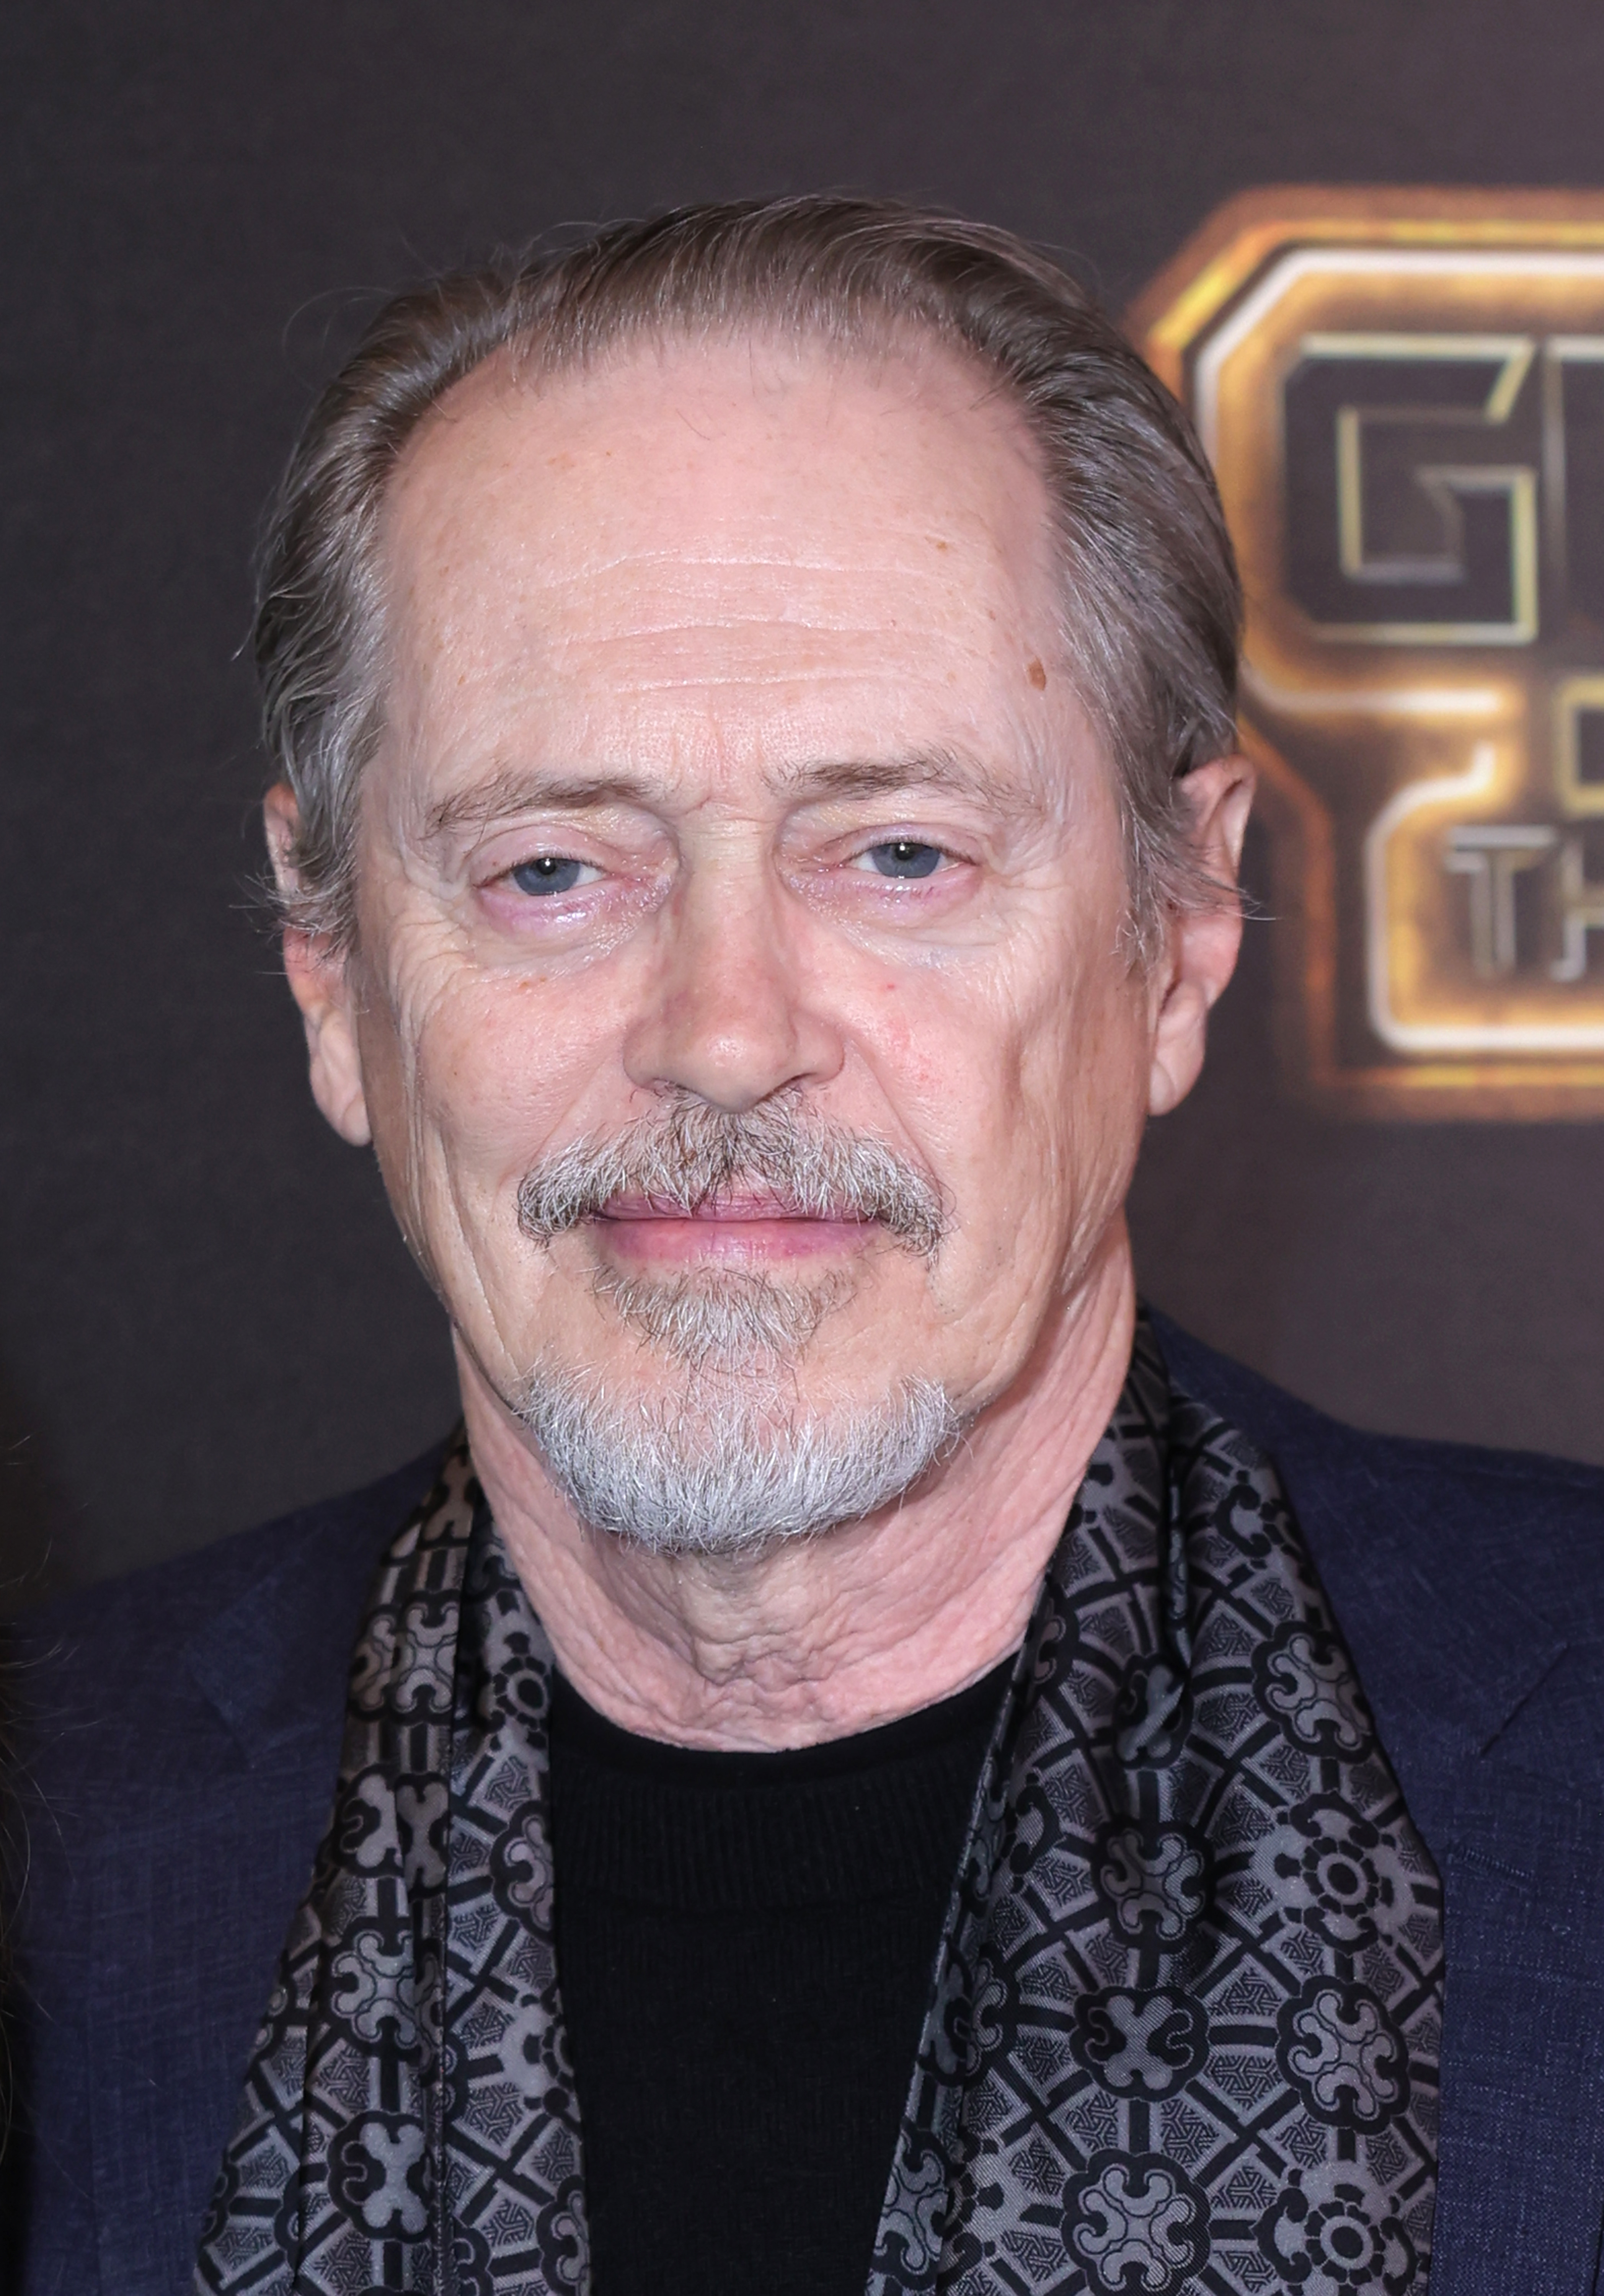 Steve Buscemi at the screening of "Guardians Of The Galaxy Vol. 3" on May 03, 2023, in New York City. | Source: Getty Images